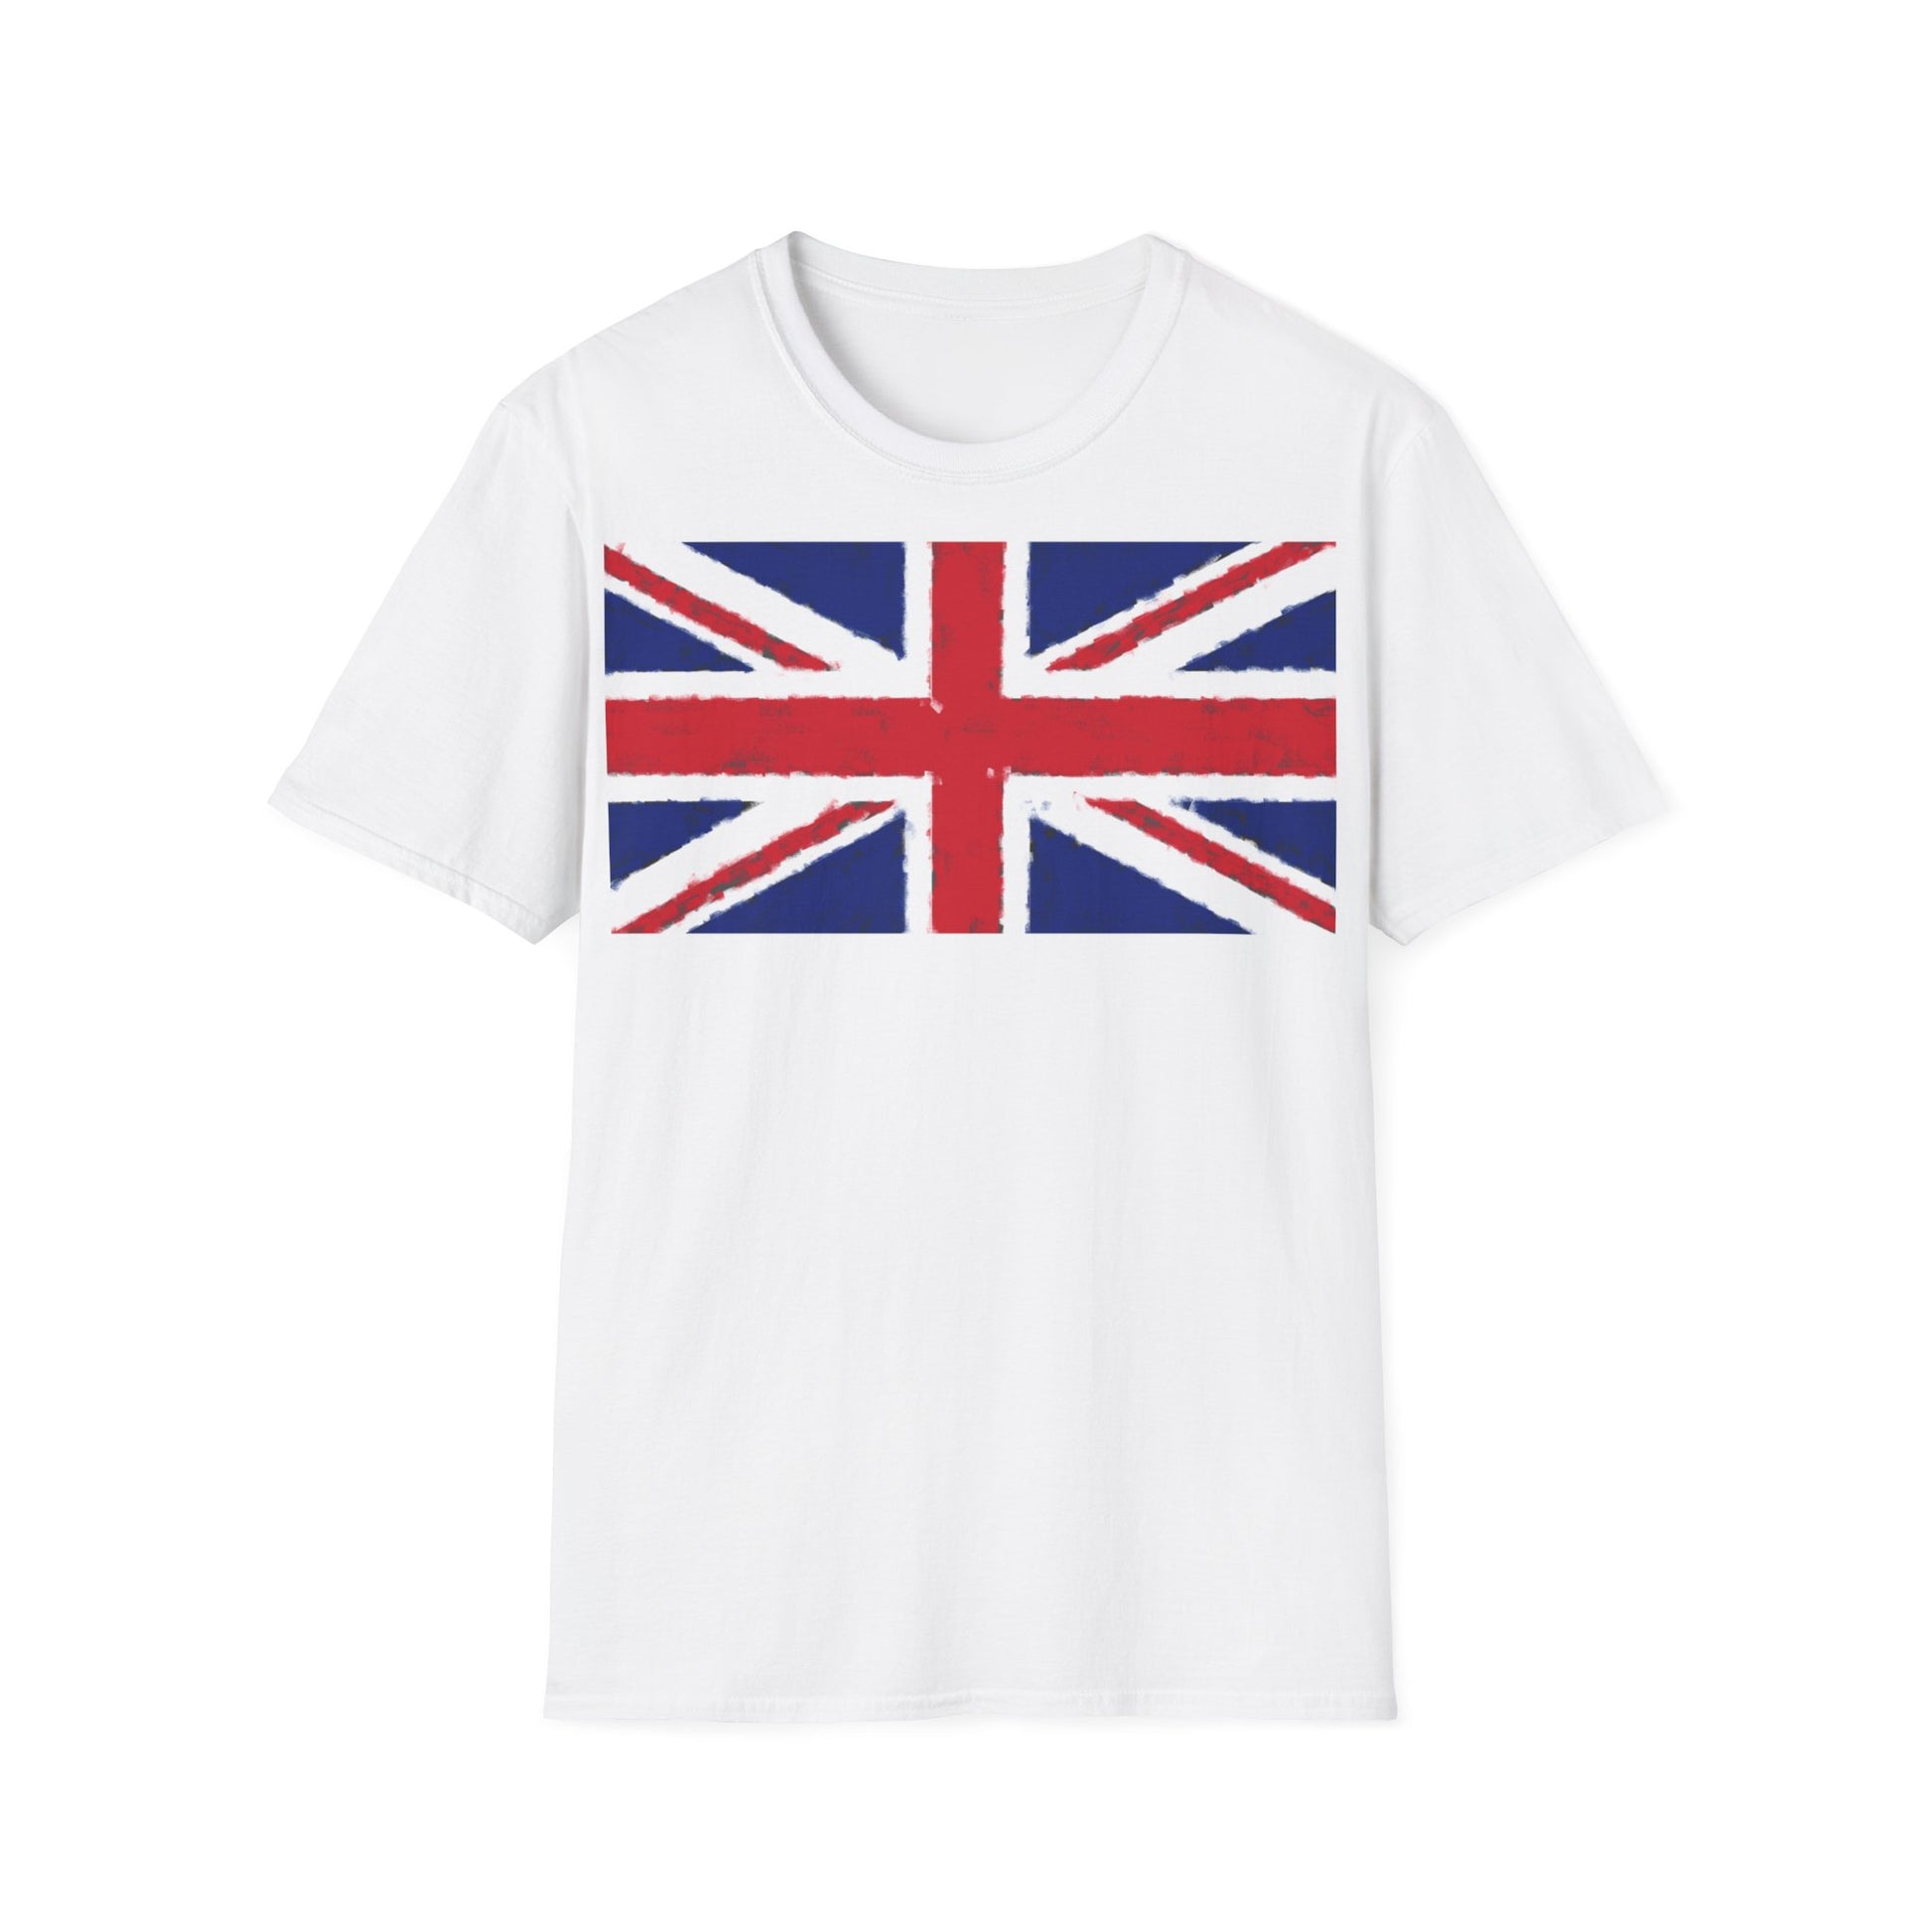 A white t-shirt with a design of the Union Jack flag with a chalk effect